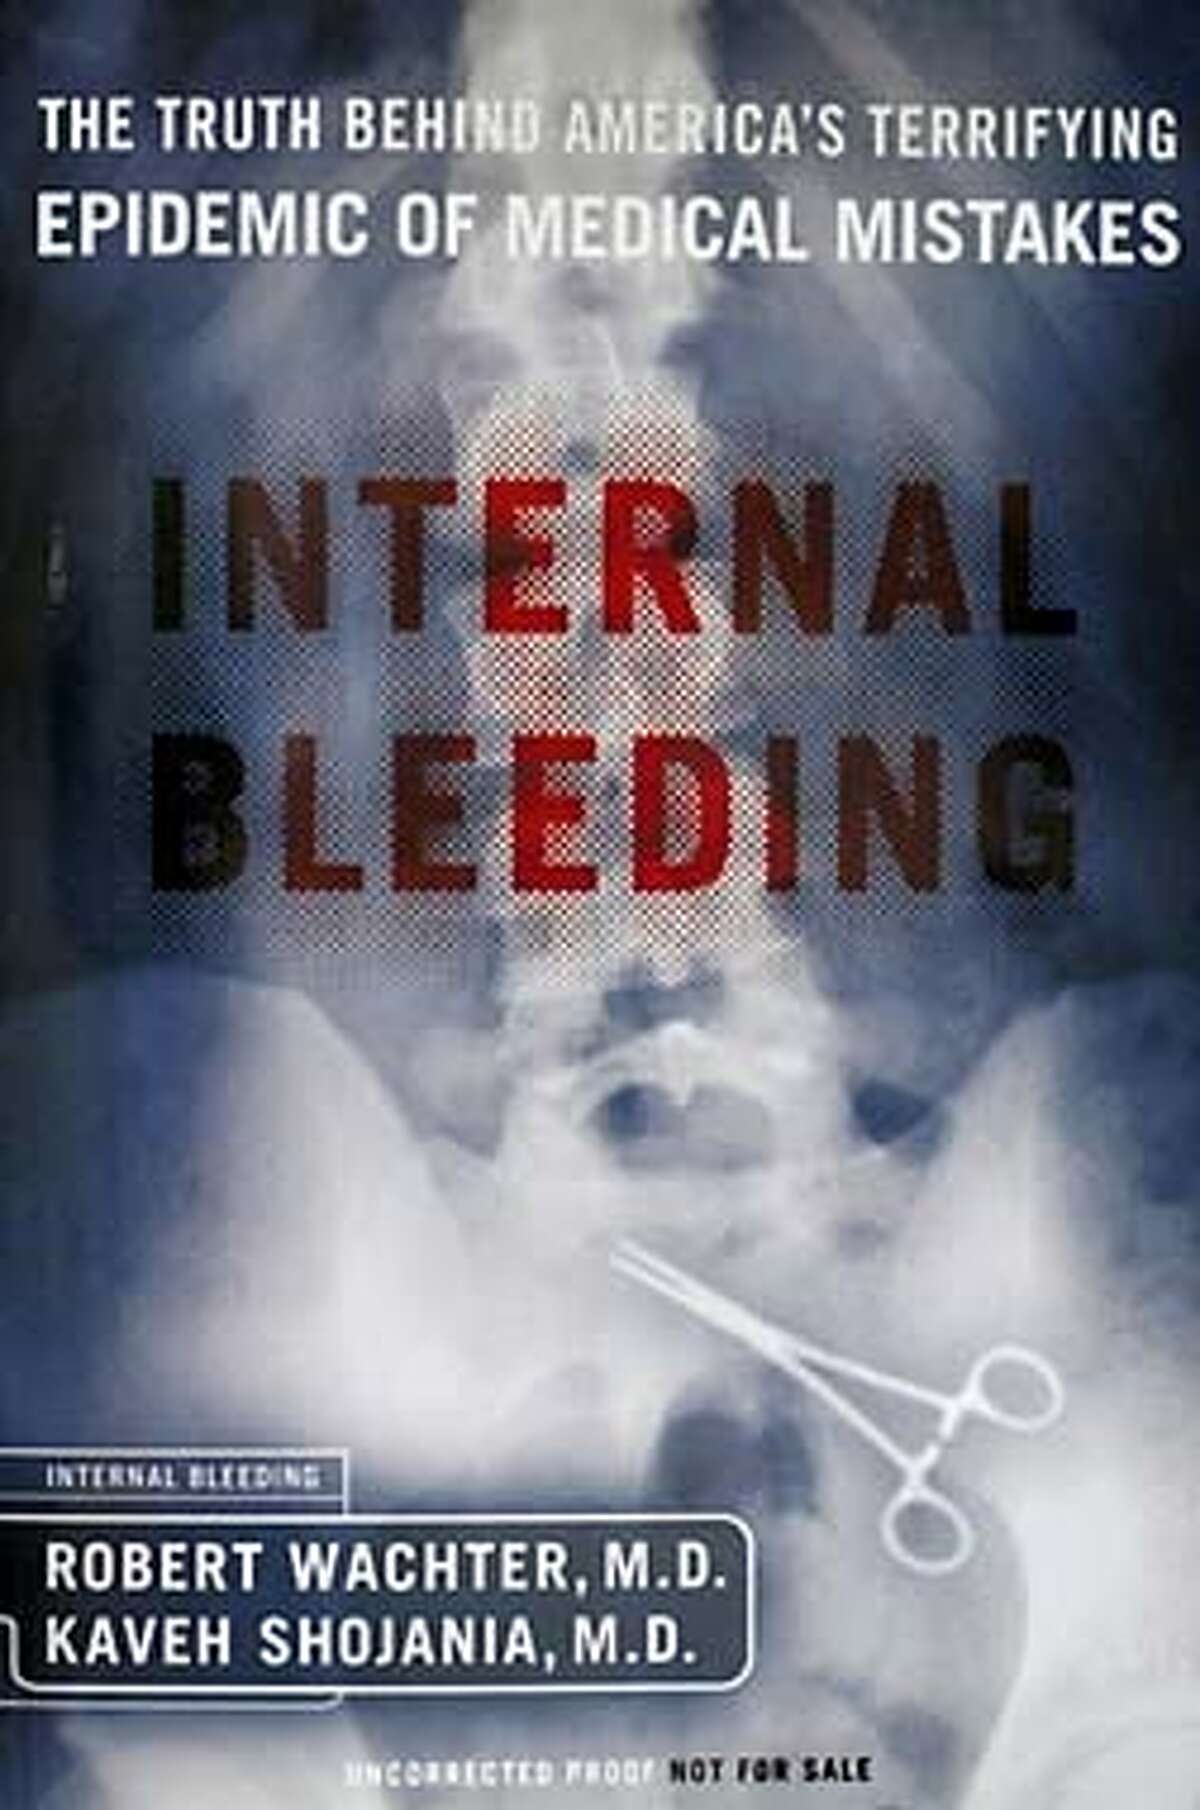 The paperback version of the popular new book on medical errors, Internal Bleeding, co-authored by Kaveh G. Shojania, M.D. (CQ) Assistant professor of Medicine at UCSF and Robert M. Wachter, M.D. (CQ) Chief of the Medical Service at UCSF on 2/19/04 in San Francisco. Kat Wade / The Chronicle